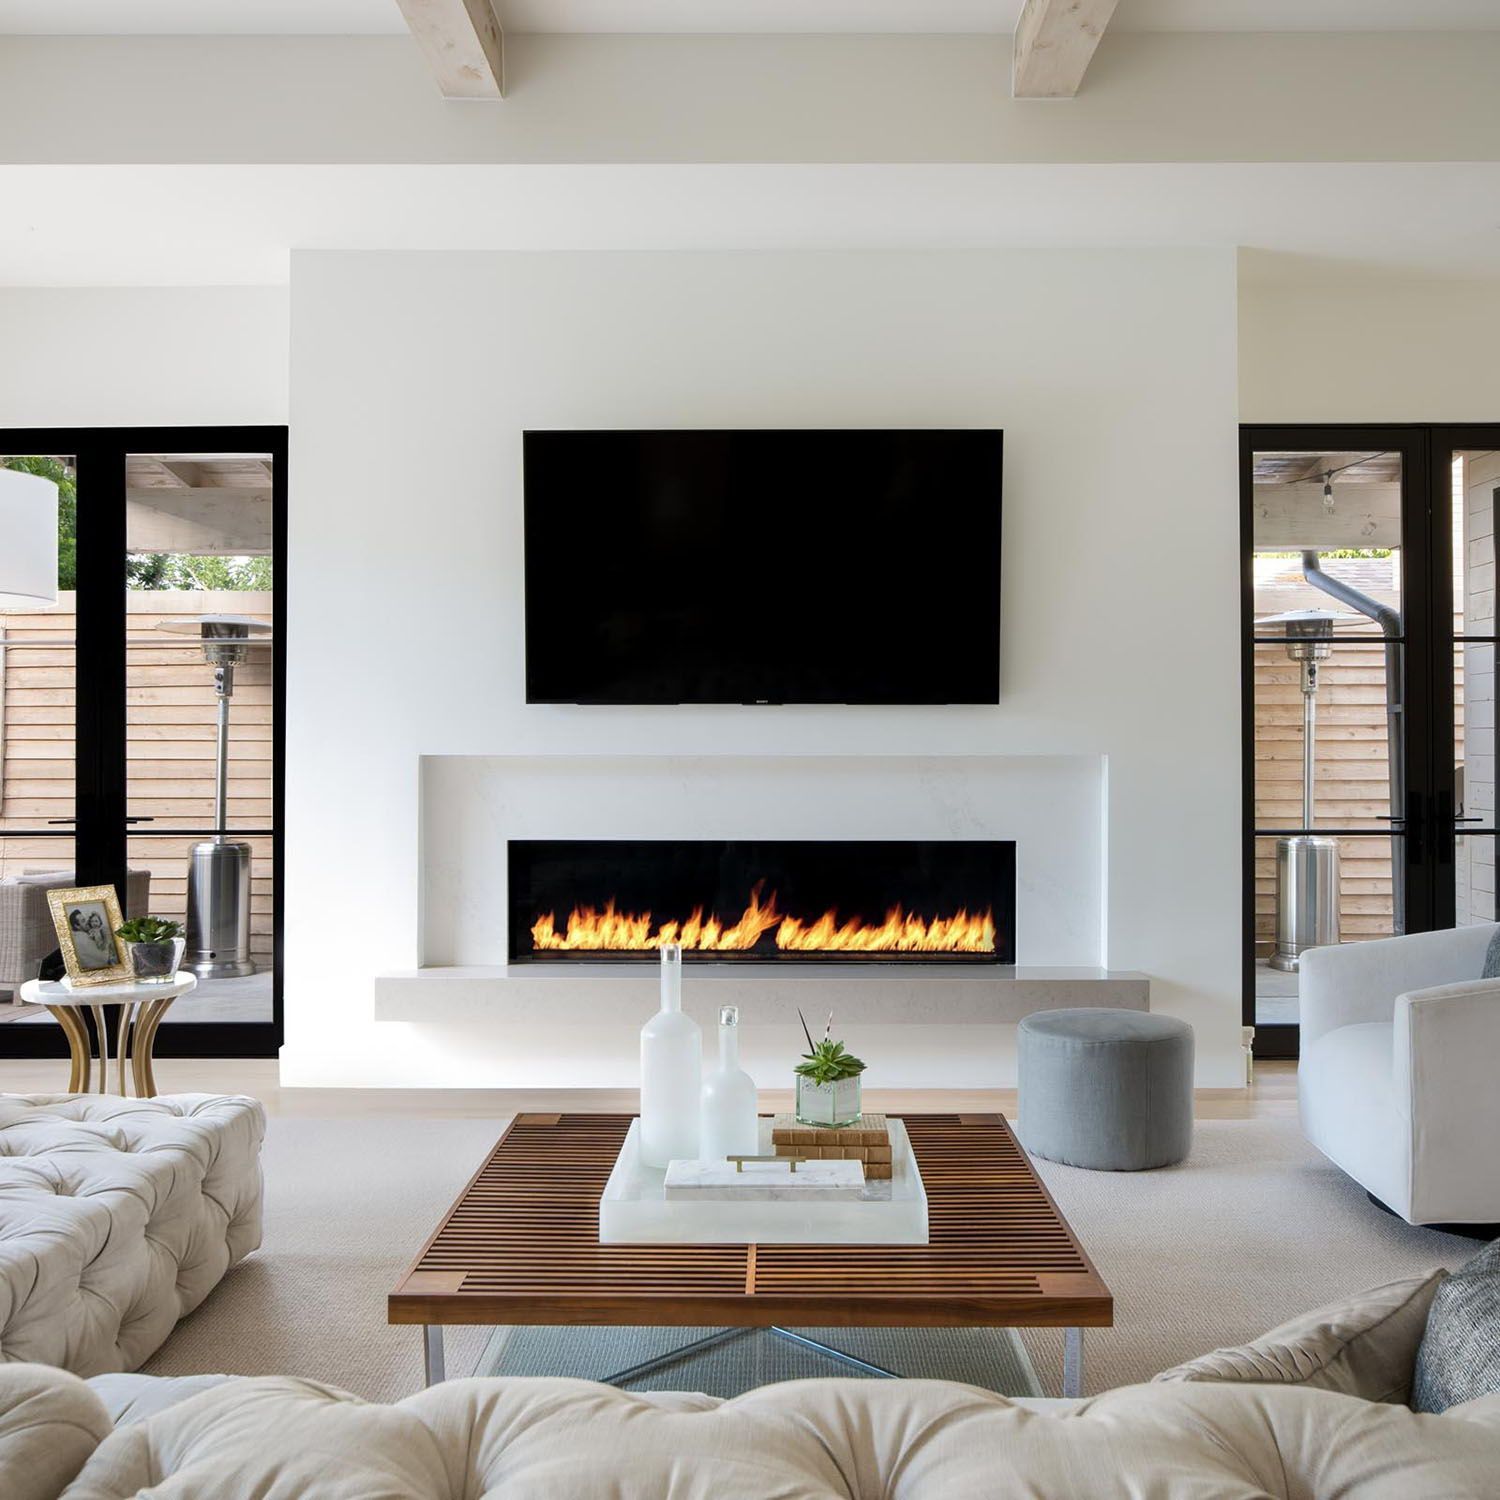  24 Modern Fireplace Ideas for Your Living Room